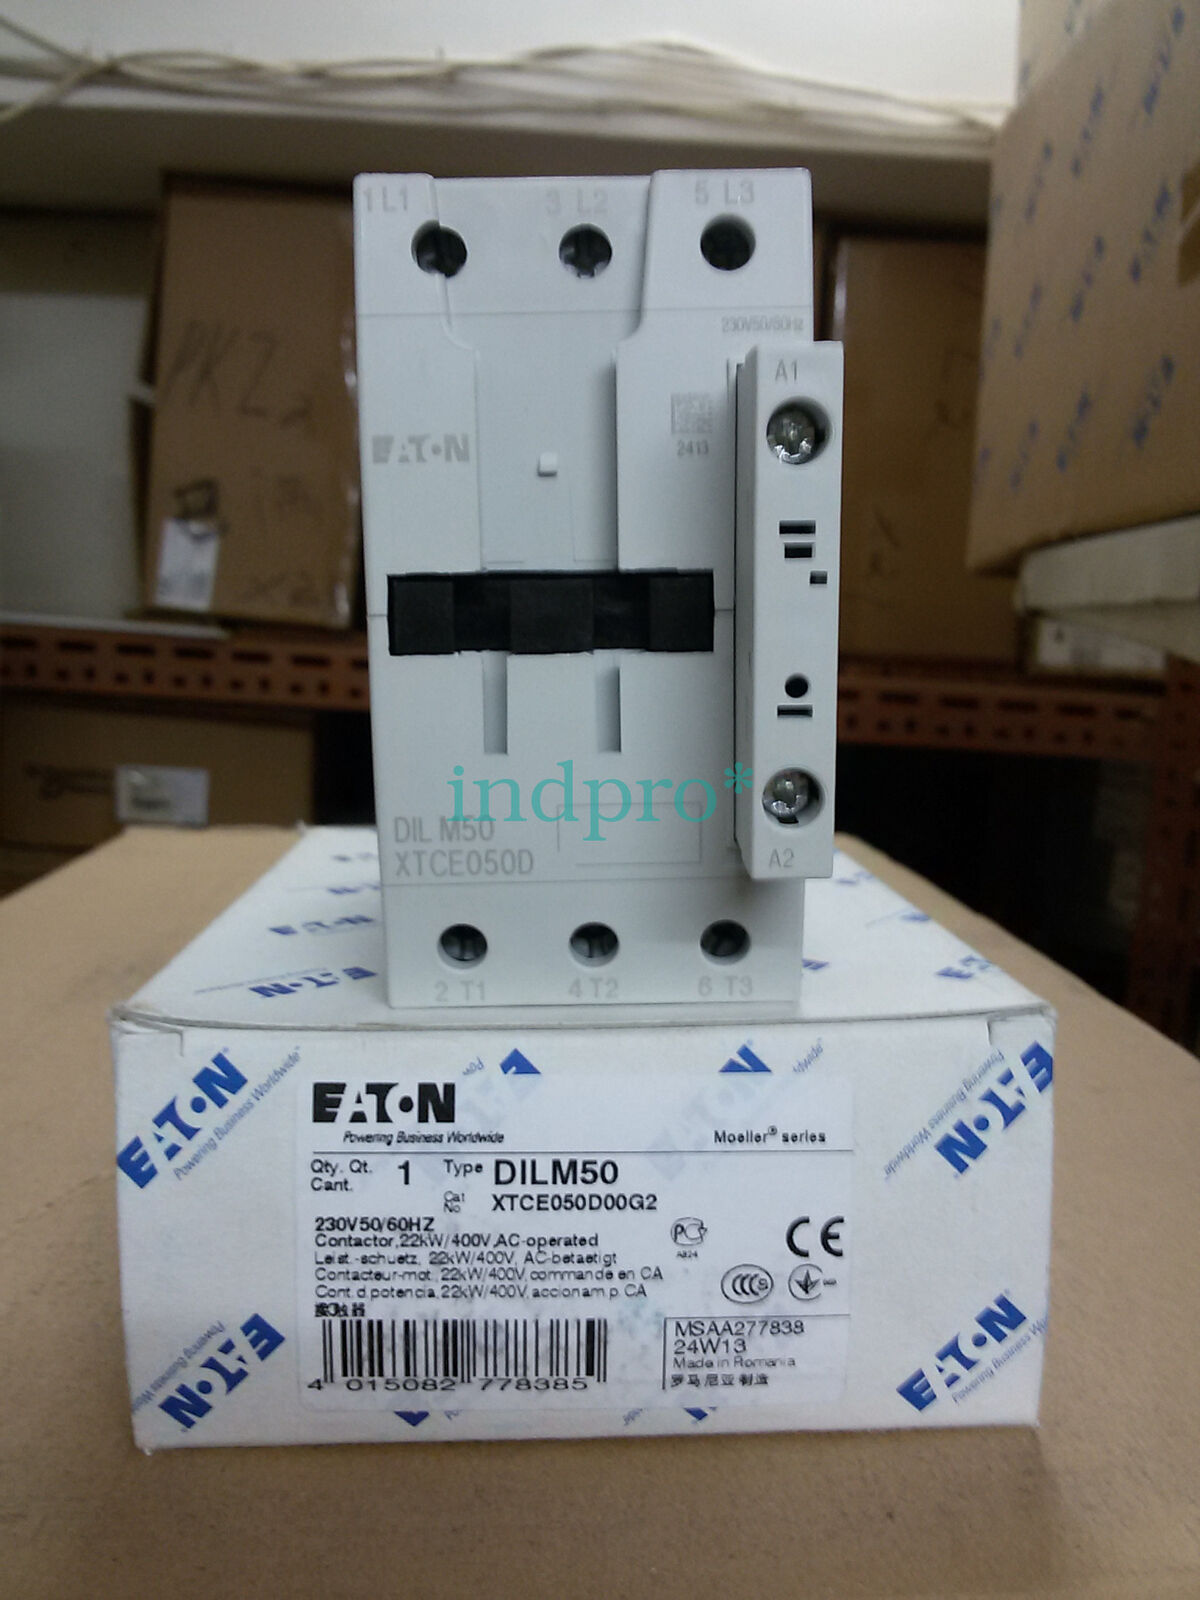 Applicable for Eaton Contactor DILM50 (220V50/60Hz)